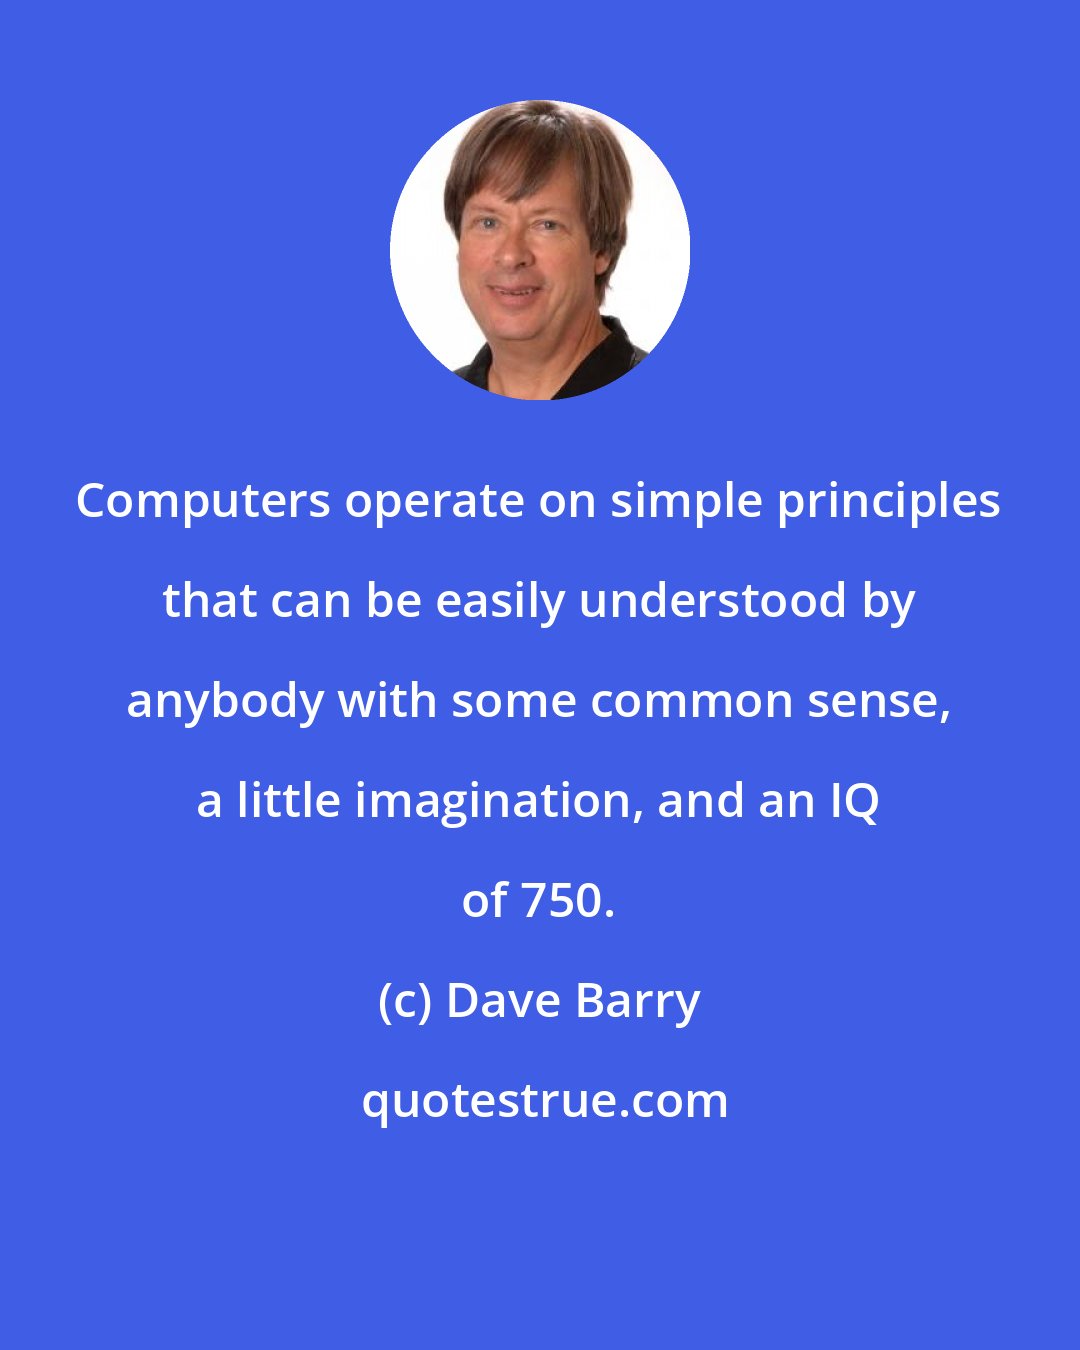 Dave Barry: Computers operate on simple principles that can be easily understood by anybody with some common sense, a little imagination, and an IQ of 750.